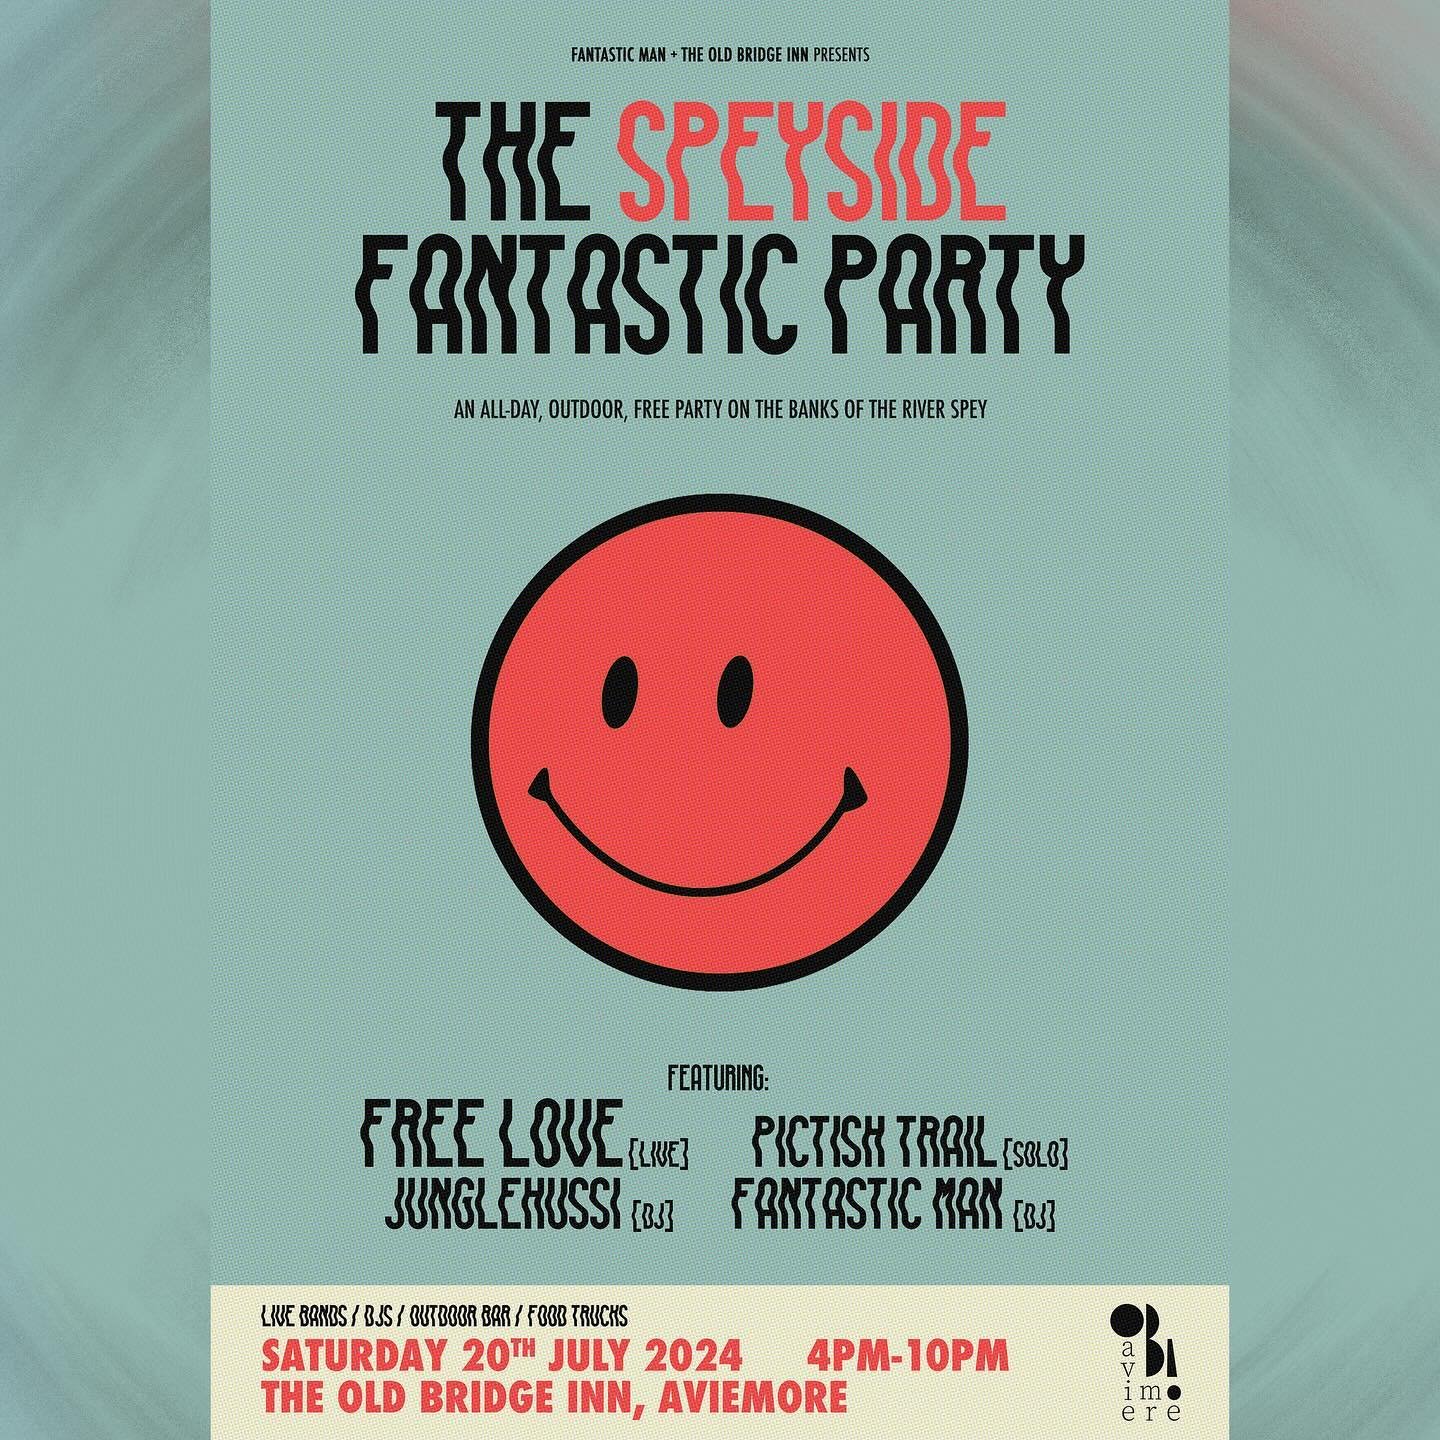 Very excited to be joining the bill for THE SPEYSIDE FANTASTIC PARTY - a summer bash in beautiful AVIEMORE organised by my dear pals @wearefantasticman (our resident Howlin&rsquo; Fling DJs). It&rsquo;s a free entry event, with a cheap-as-chips after